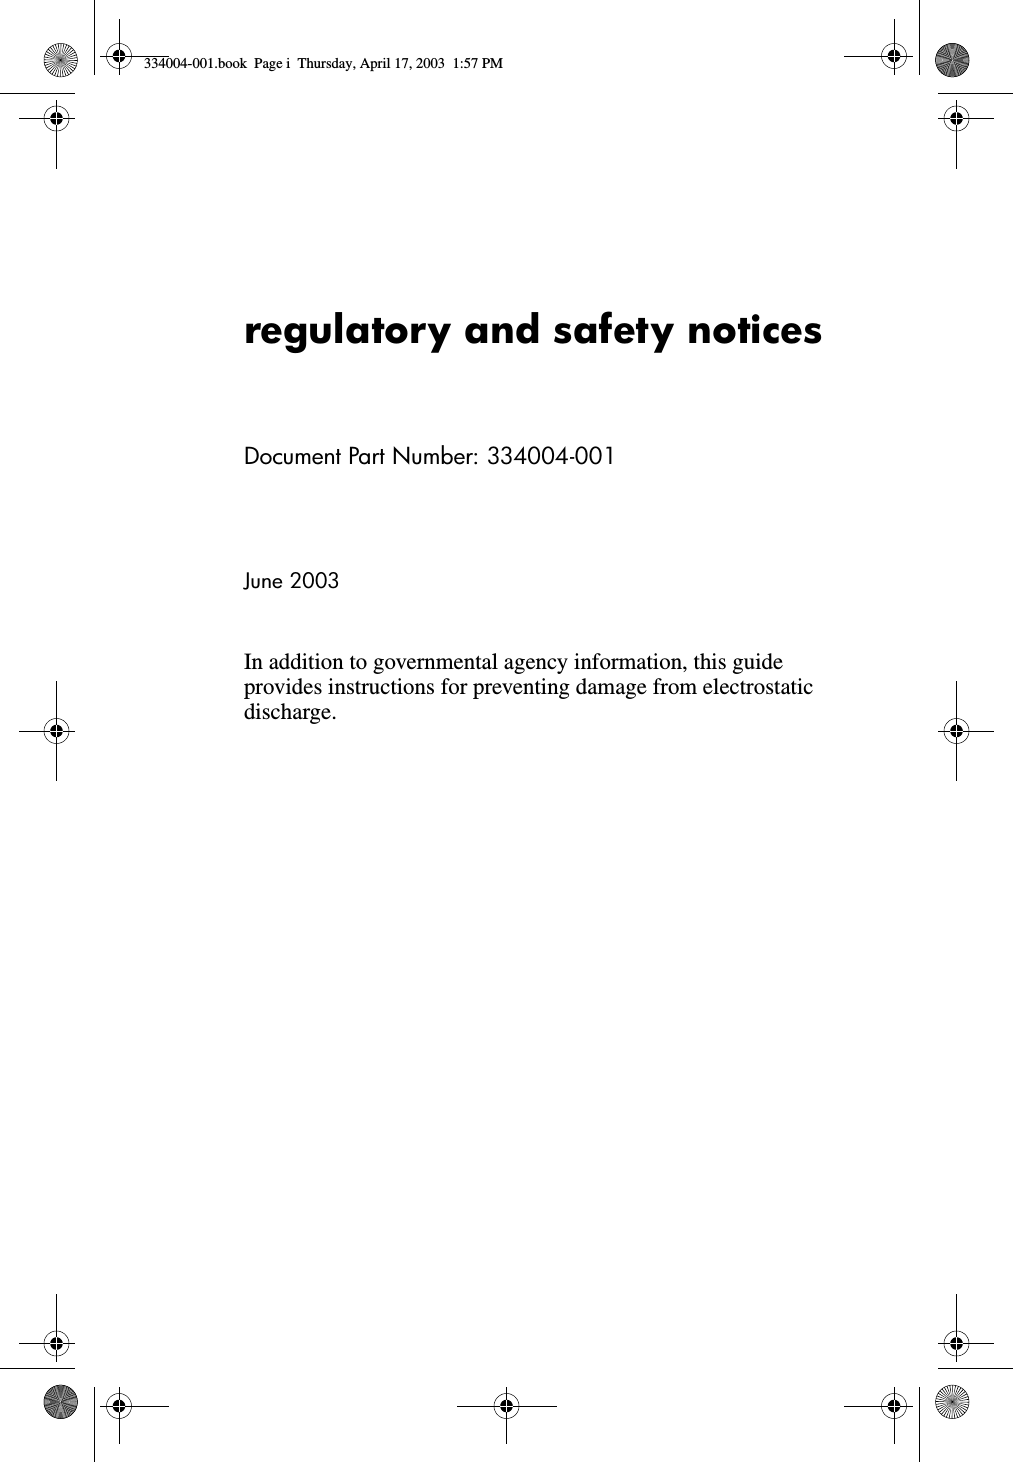 regulatory and safety noticesDocument Part Number: 334004-001June 2003In addition to governmental agency information, this guide provides instructions for preventing damage from electrostatic discharge.334004-001.book  Page i  Thursday, April 17, 2003  1:57 PM